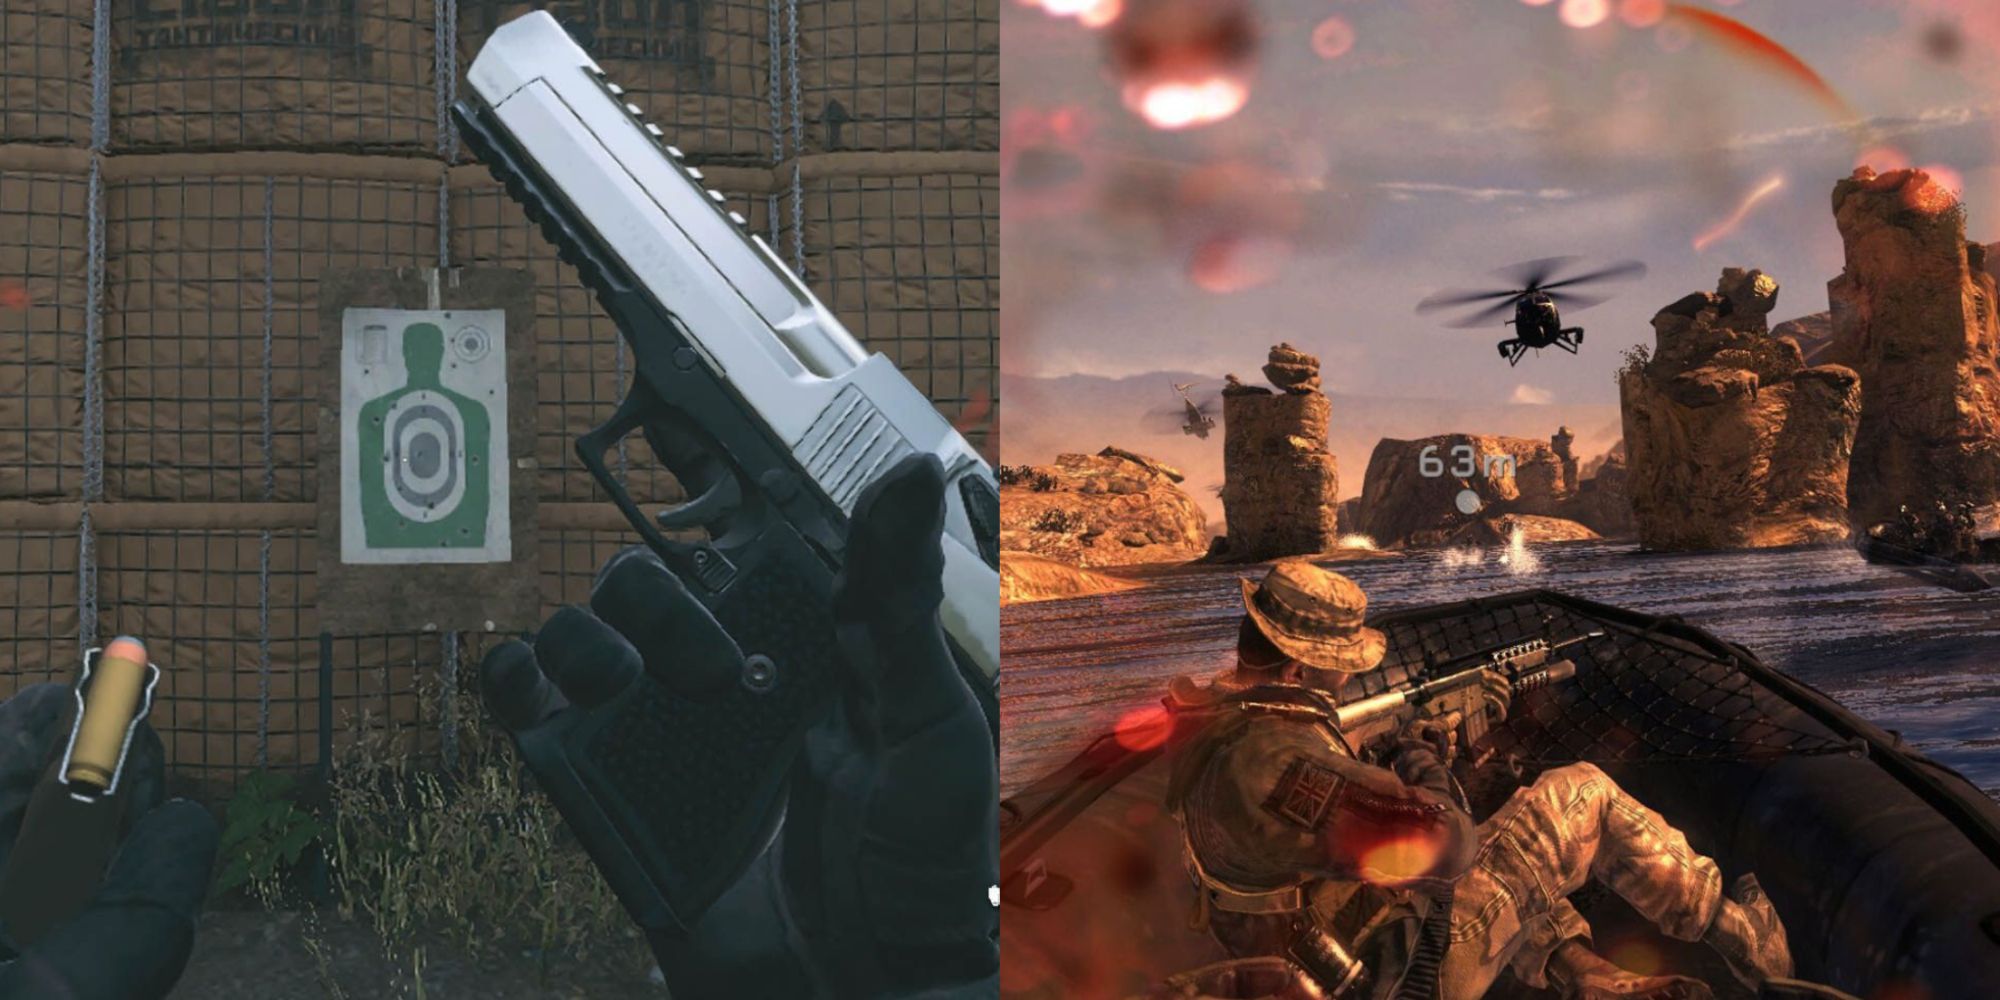 FPS Tropes That Don't Make Sense Featured Split Image Of Reloading And Captain Price In Boat